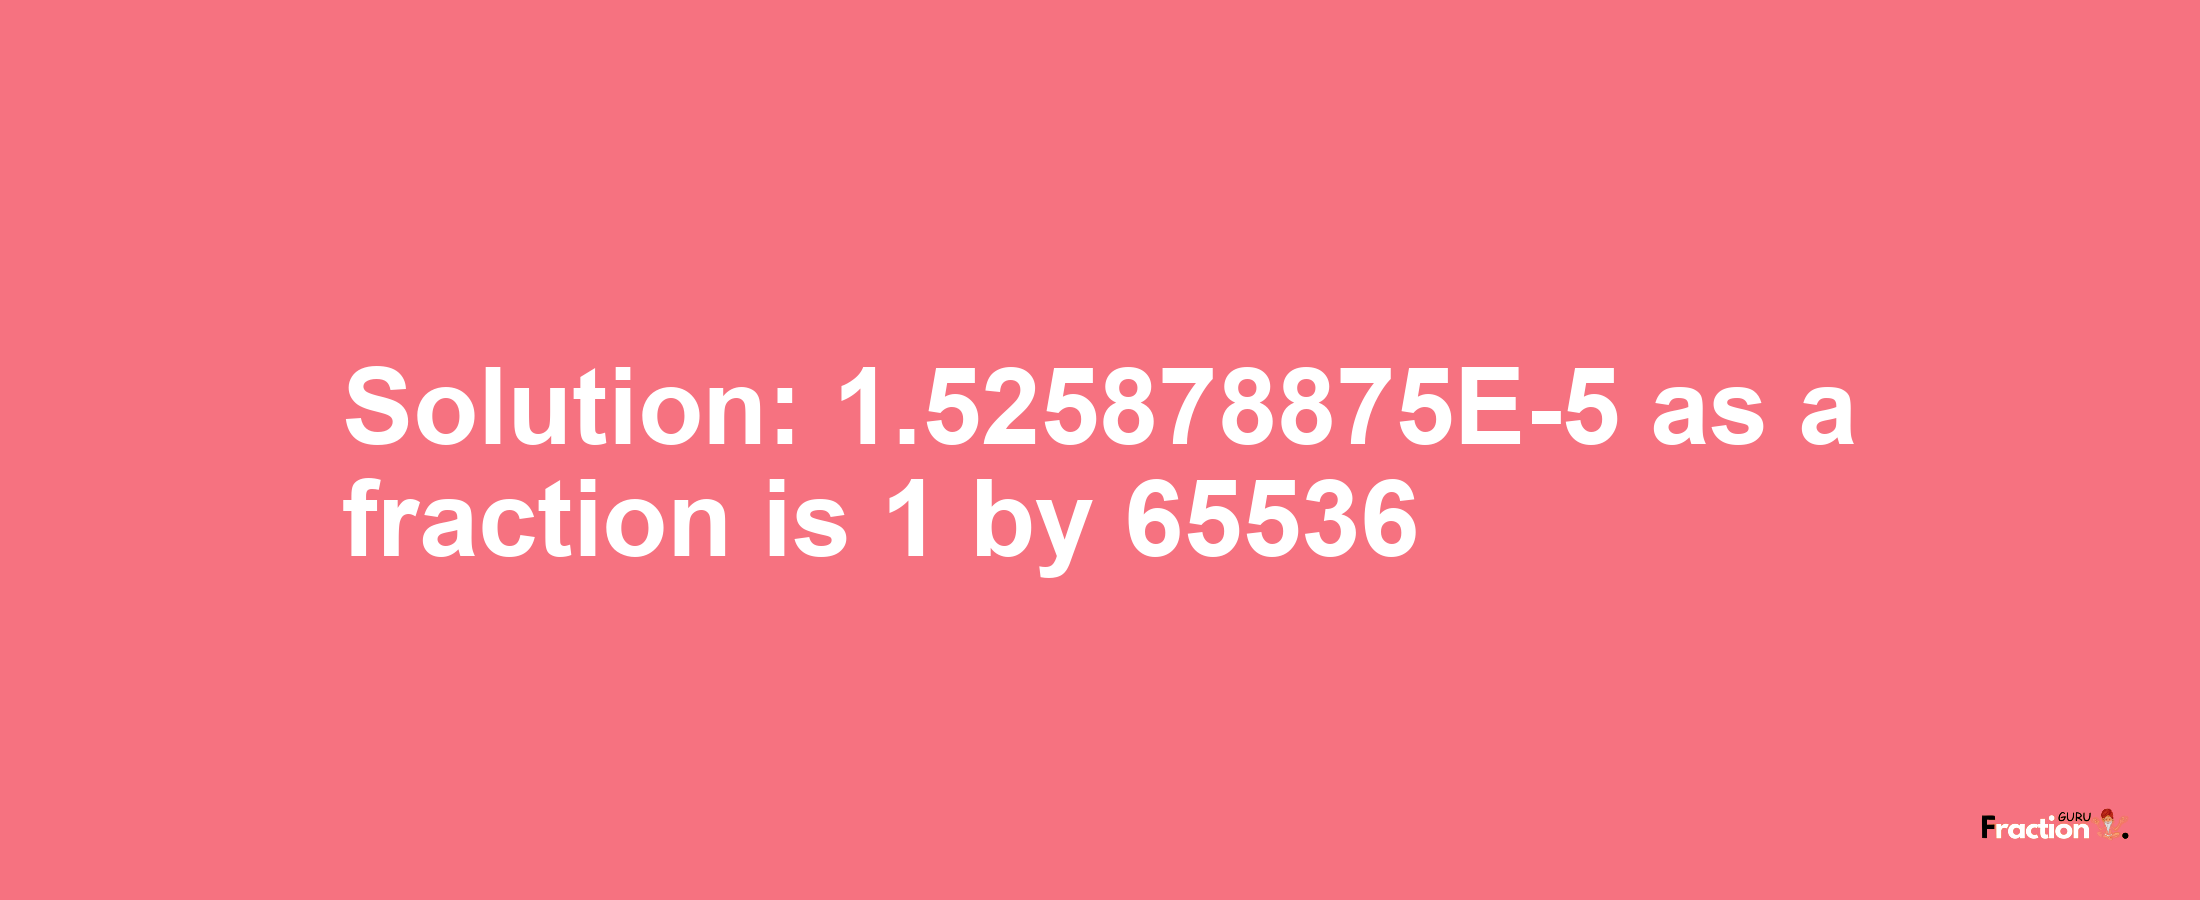 Solution:1.525878875E-5 as a fraction is 1/65536